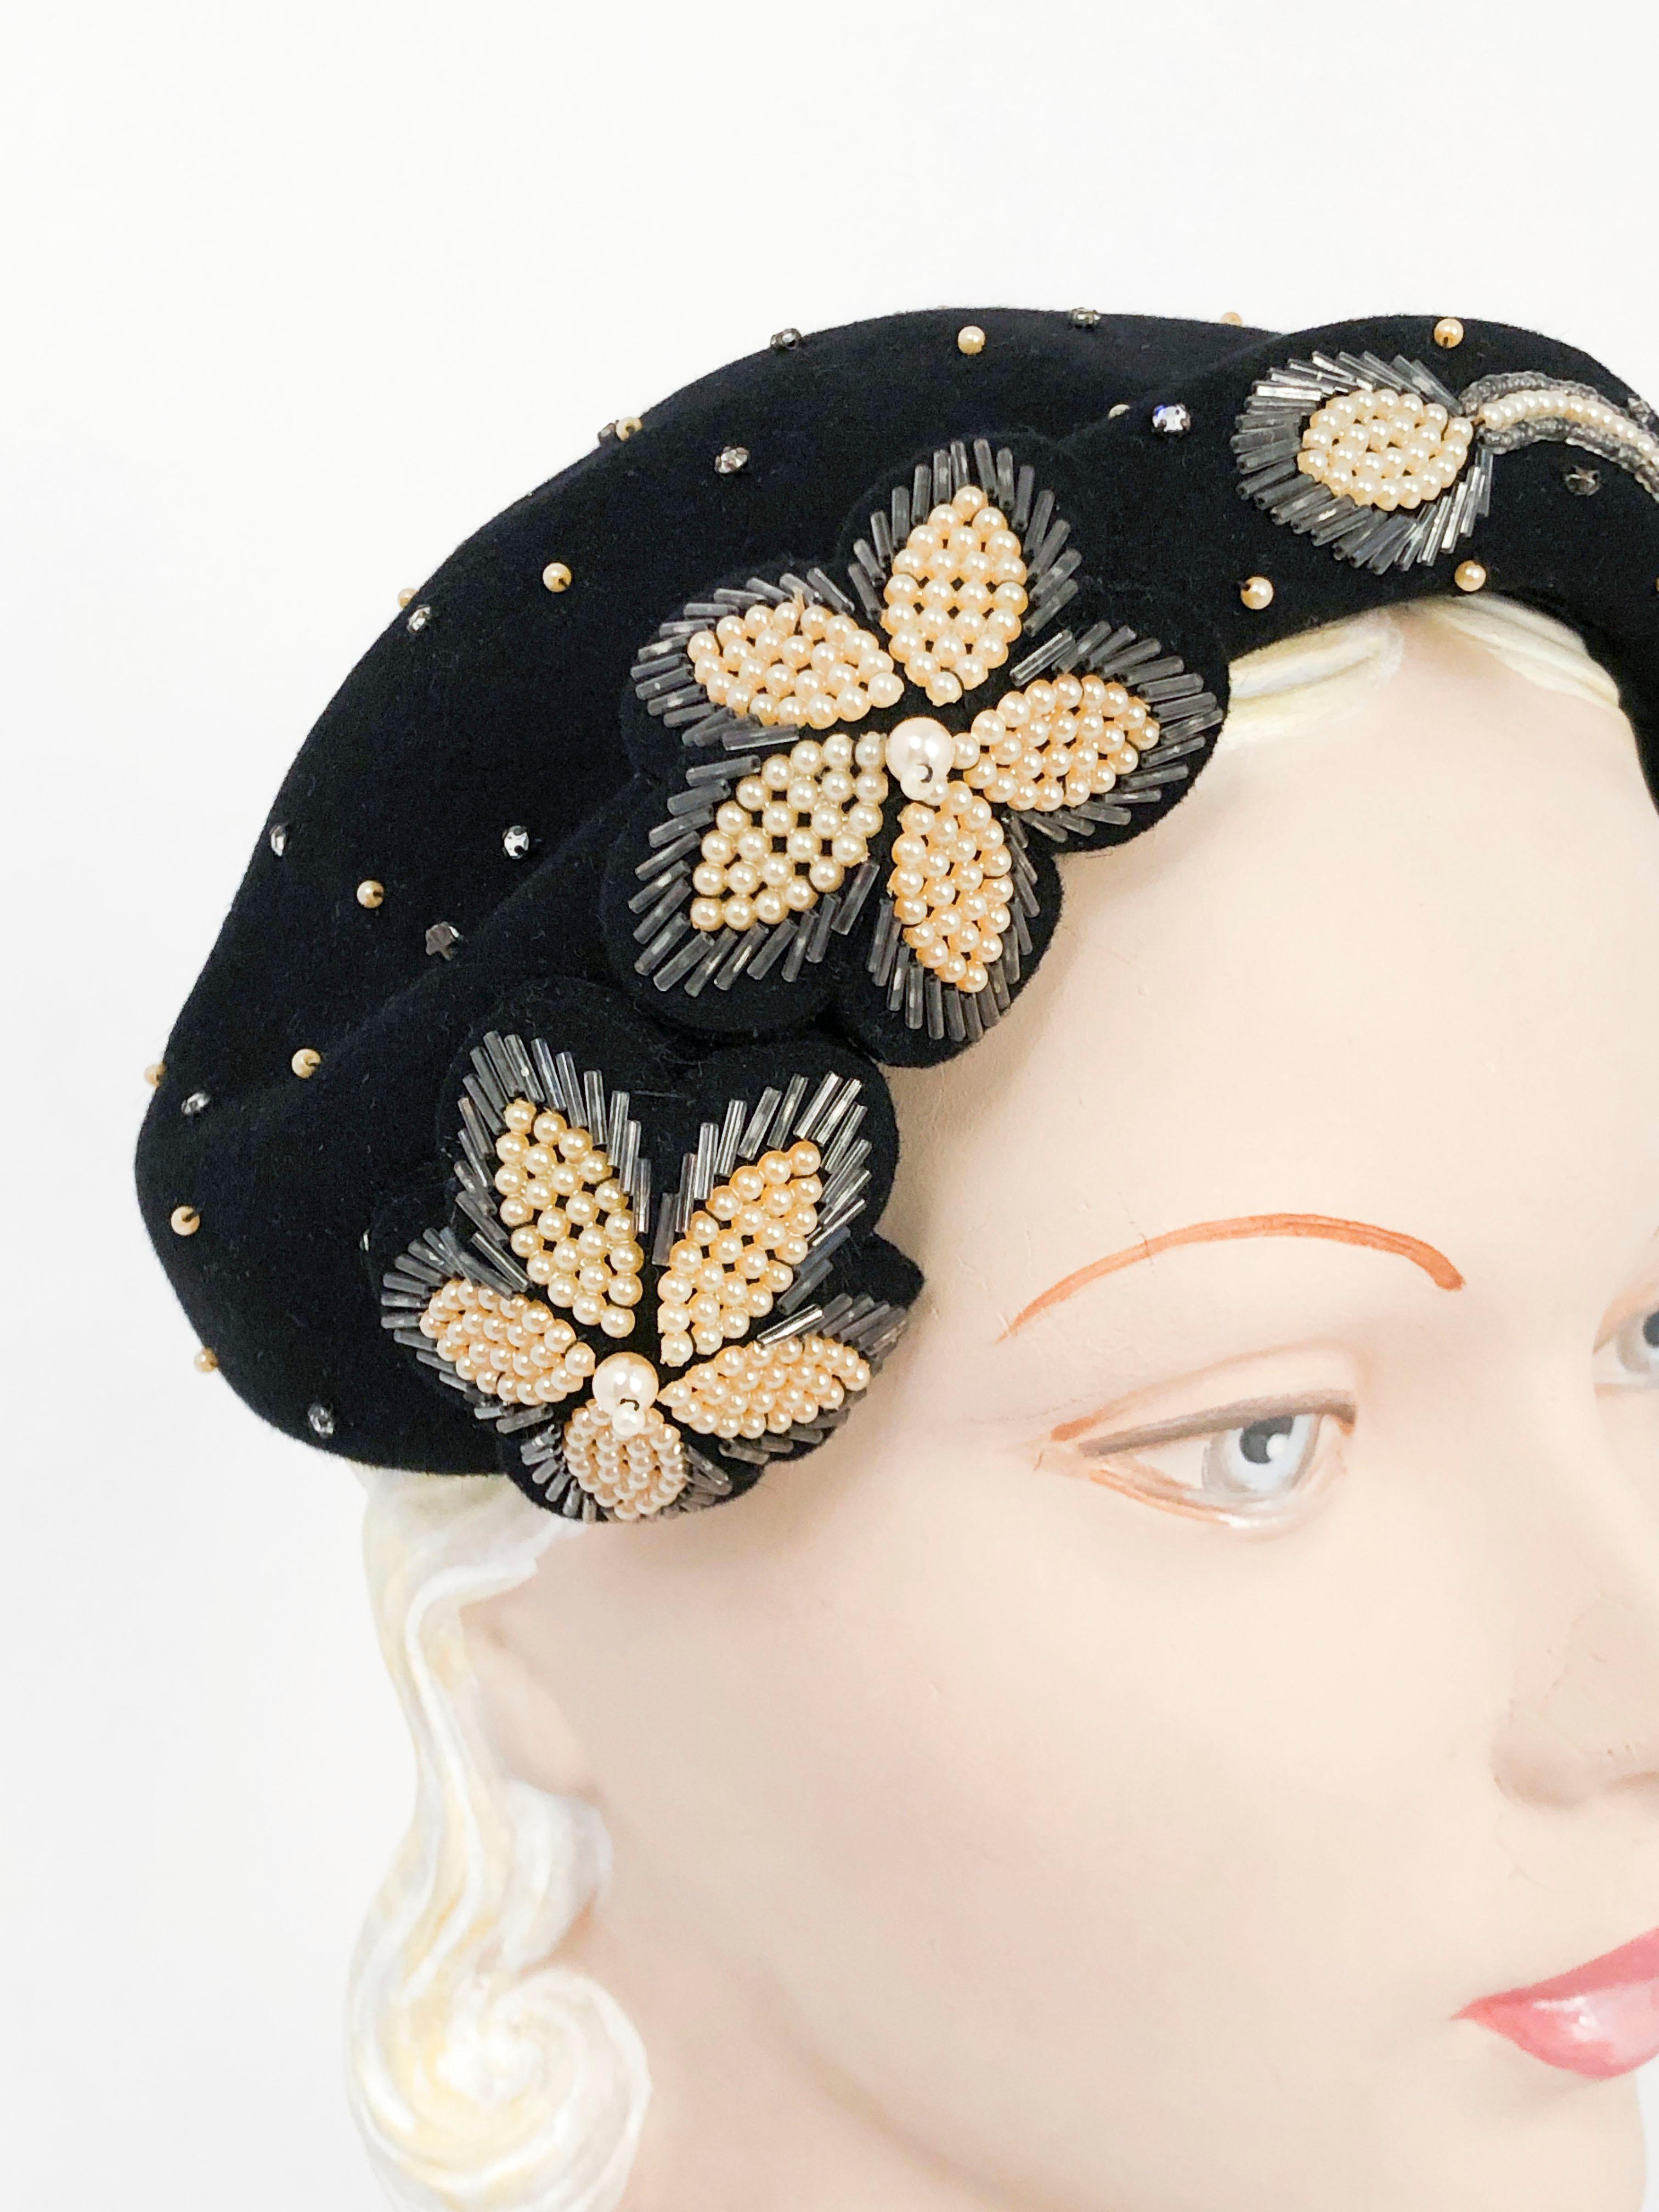 1950s Black cashmere shaped hat featuring hand-beading, faux pearls, fastened rhinestones, and appliqué beaded flowers. The faux pearls and fastened rhinestones are place throughout the field of the hat